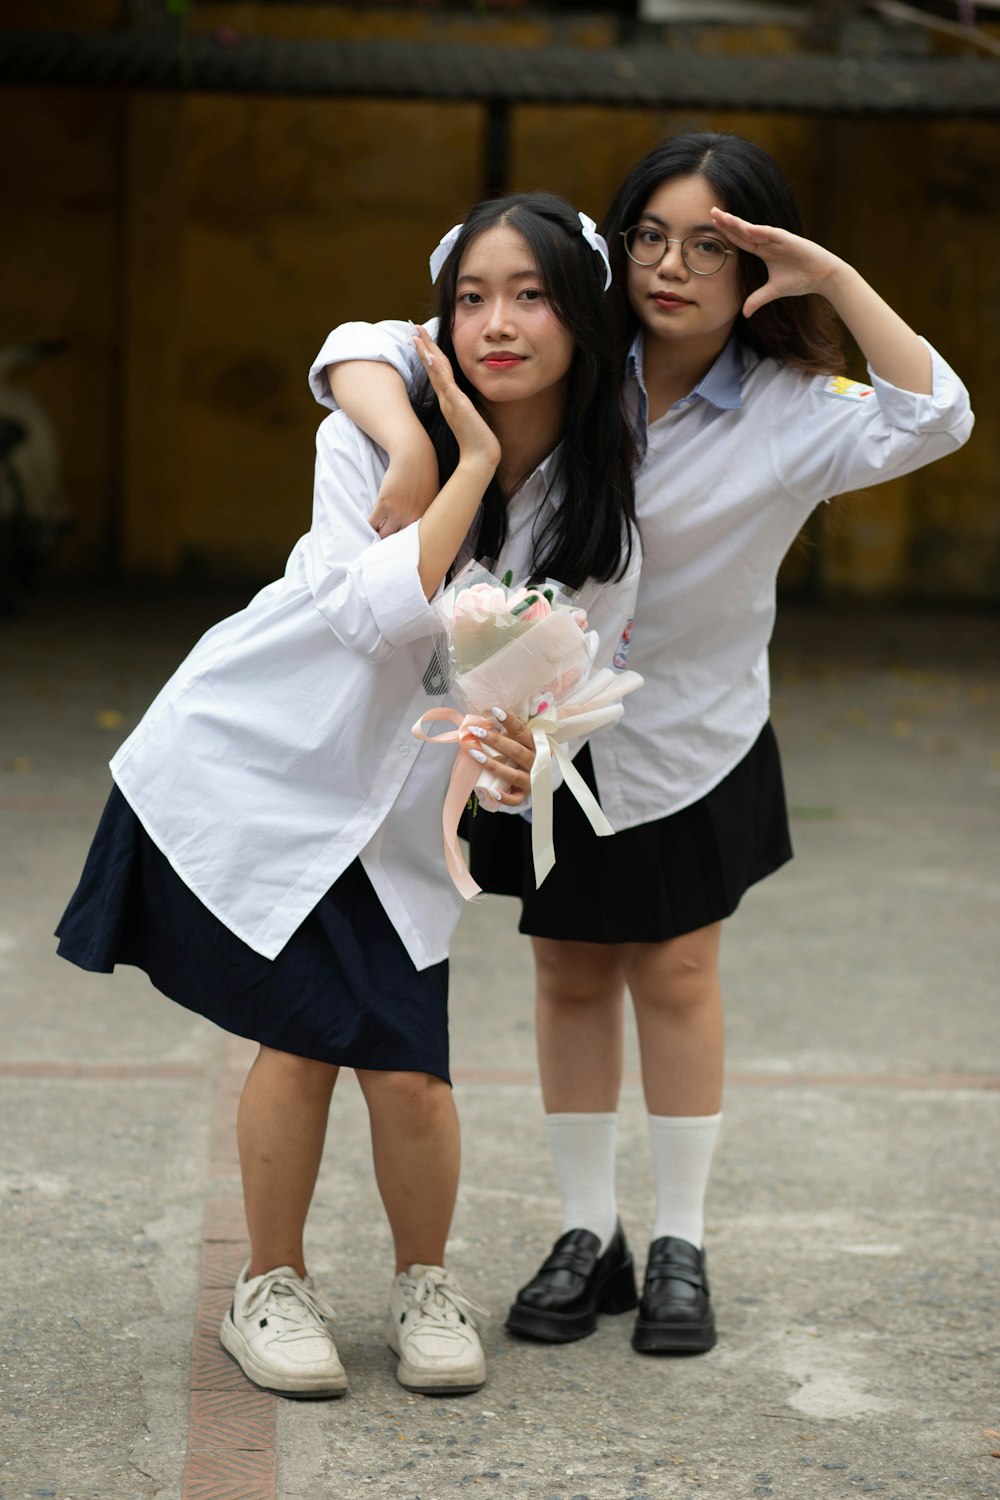 two young girls dressed in school uniforms posing for a picture